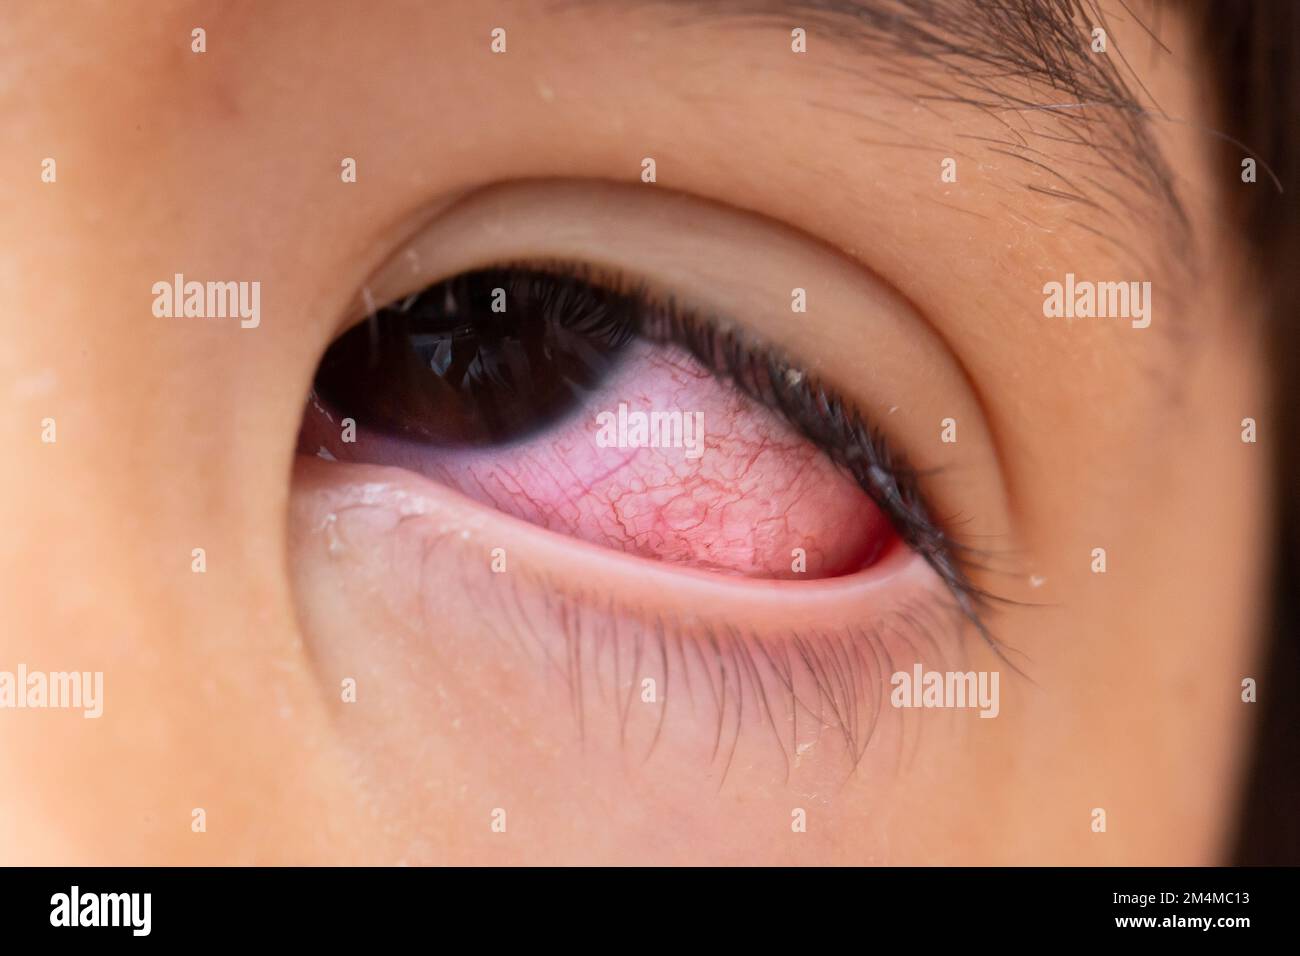 Macro of a very red eye with oriental features due to conjunctivitis. Dryness and redness of the sclera due to irritation Stock Photo